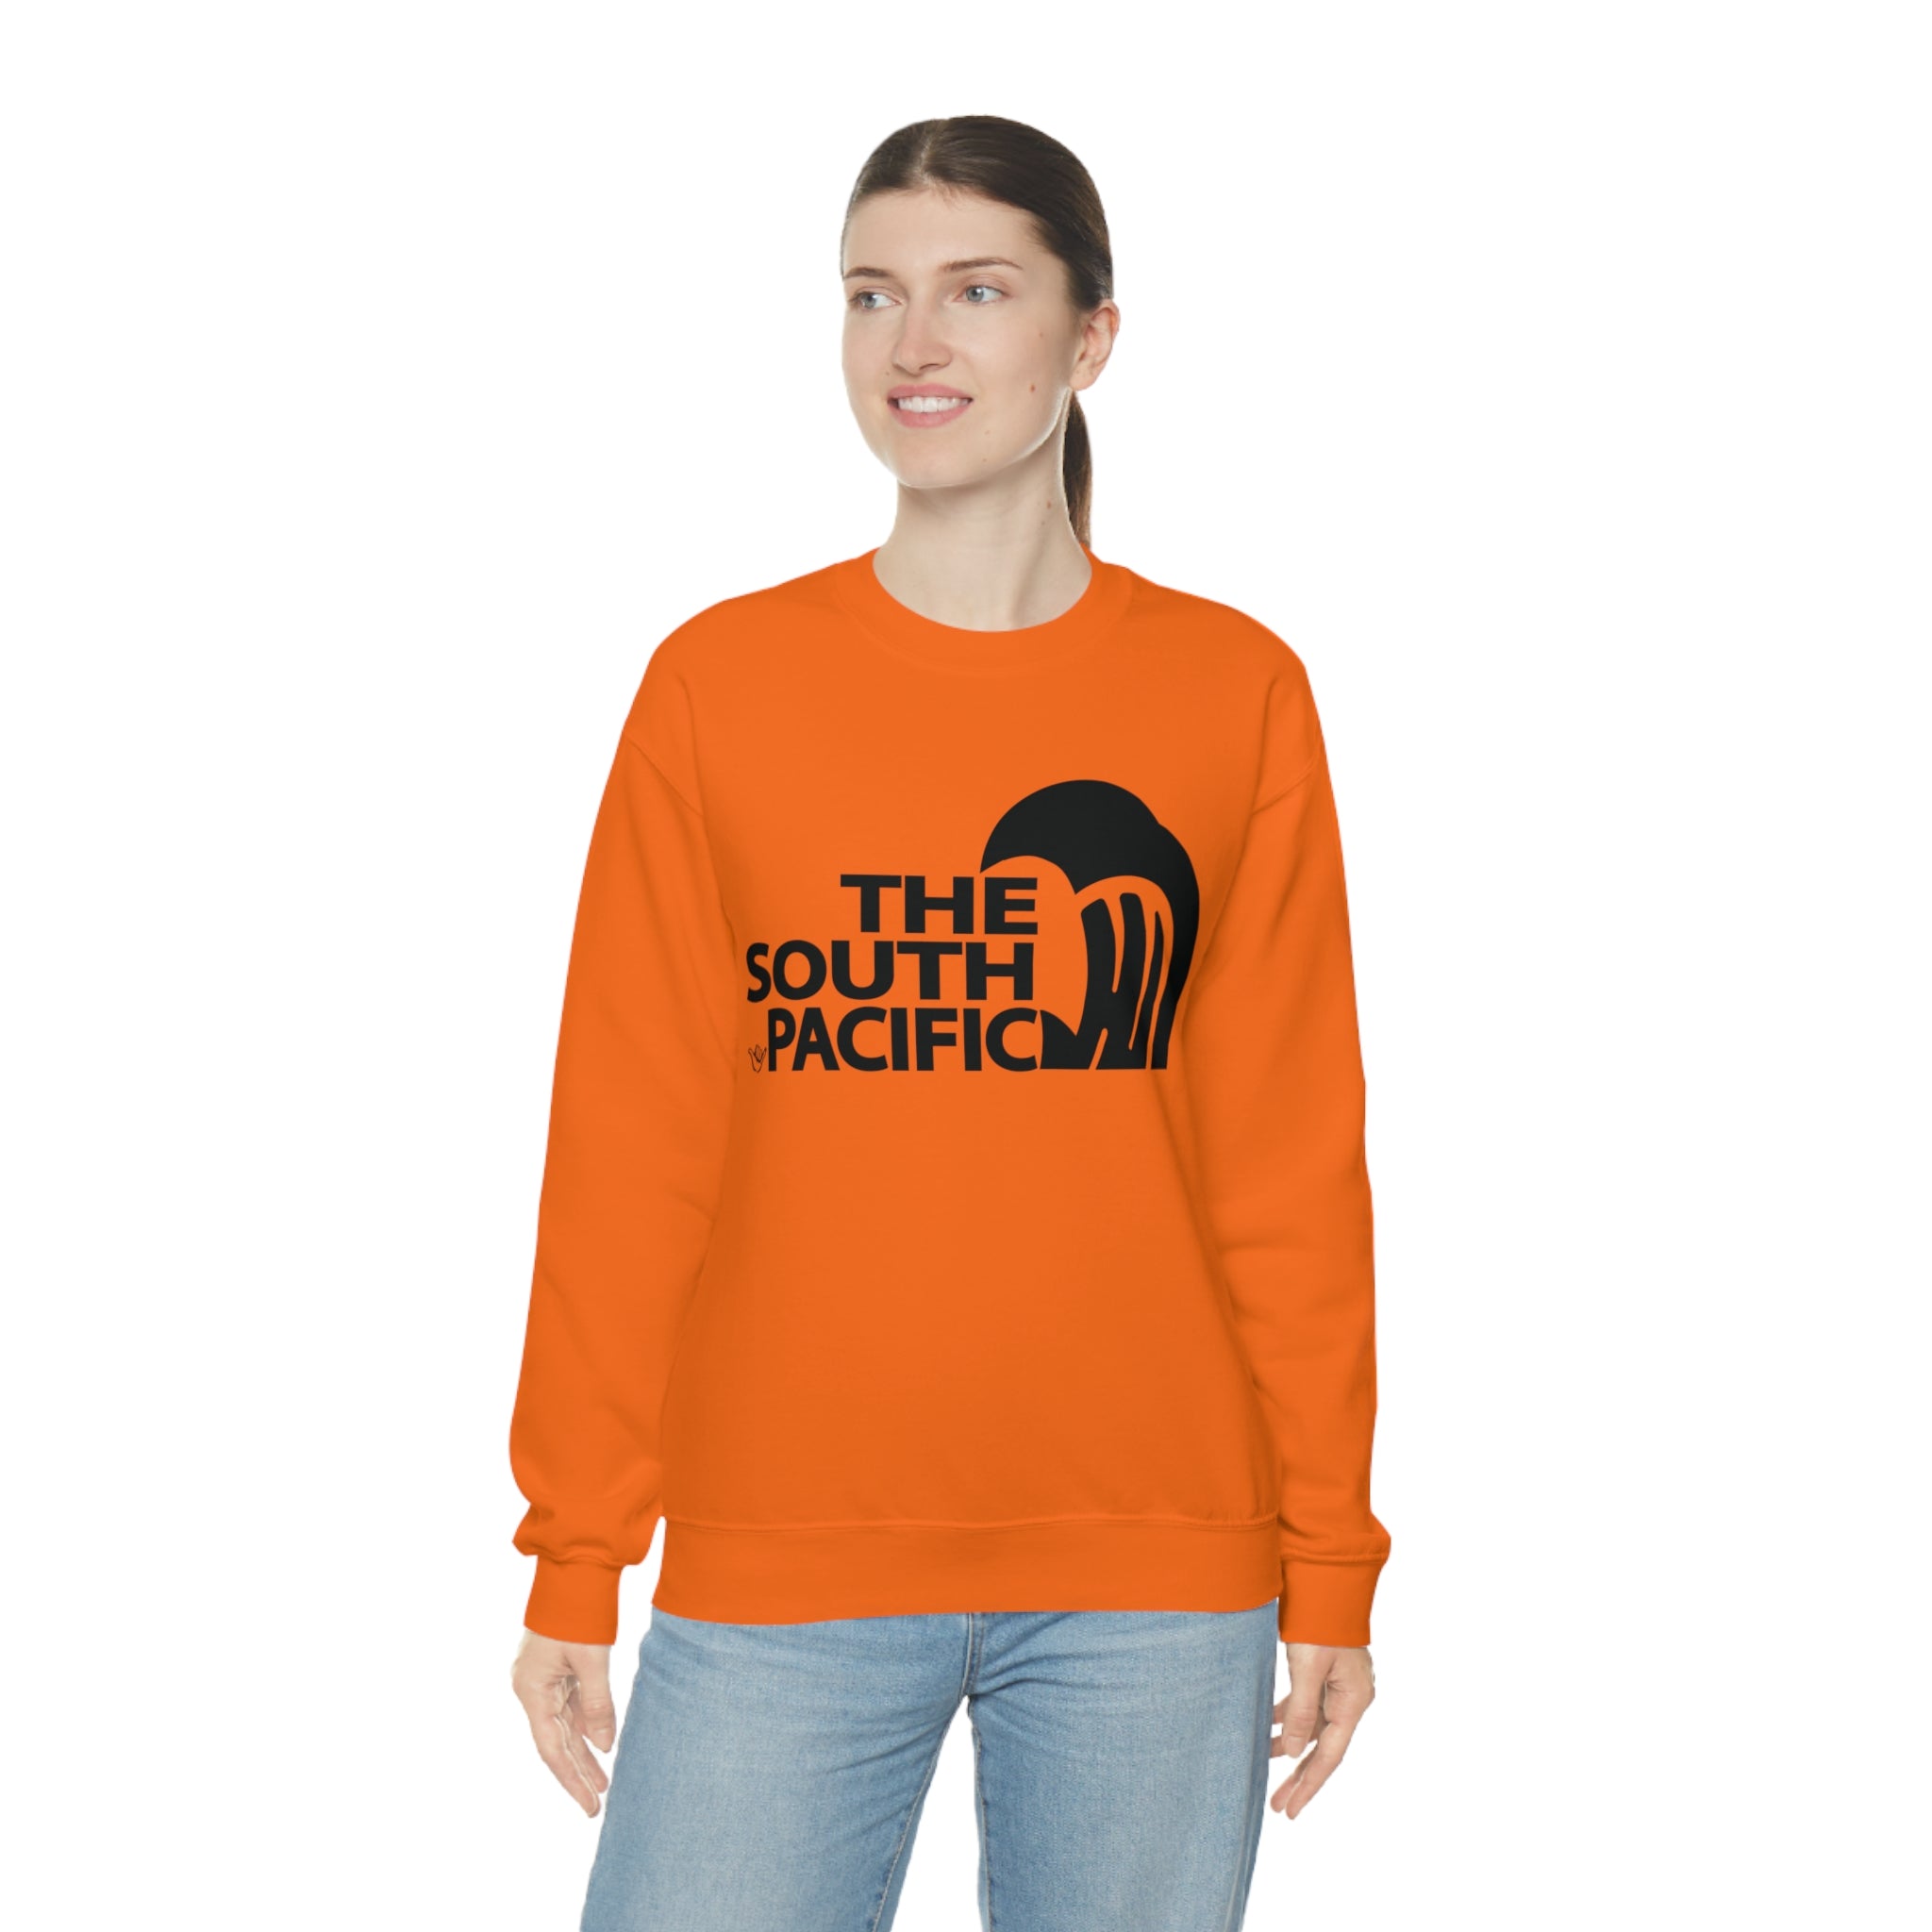 The SOUTH PACIFIC WAVE CREWNECK SWEATER